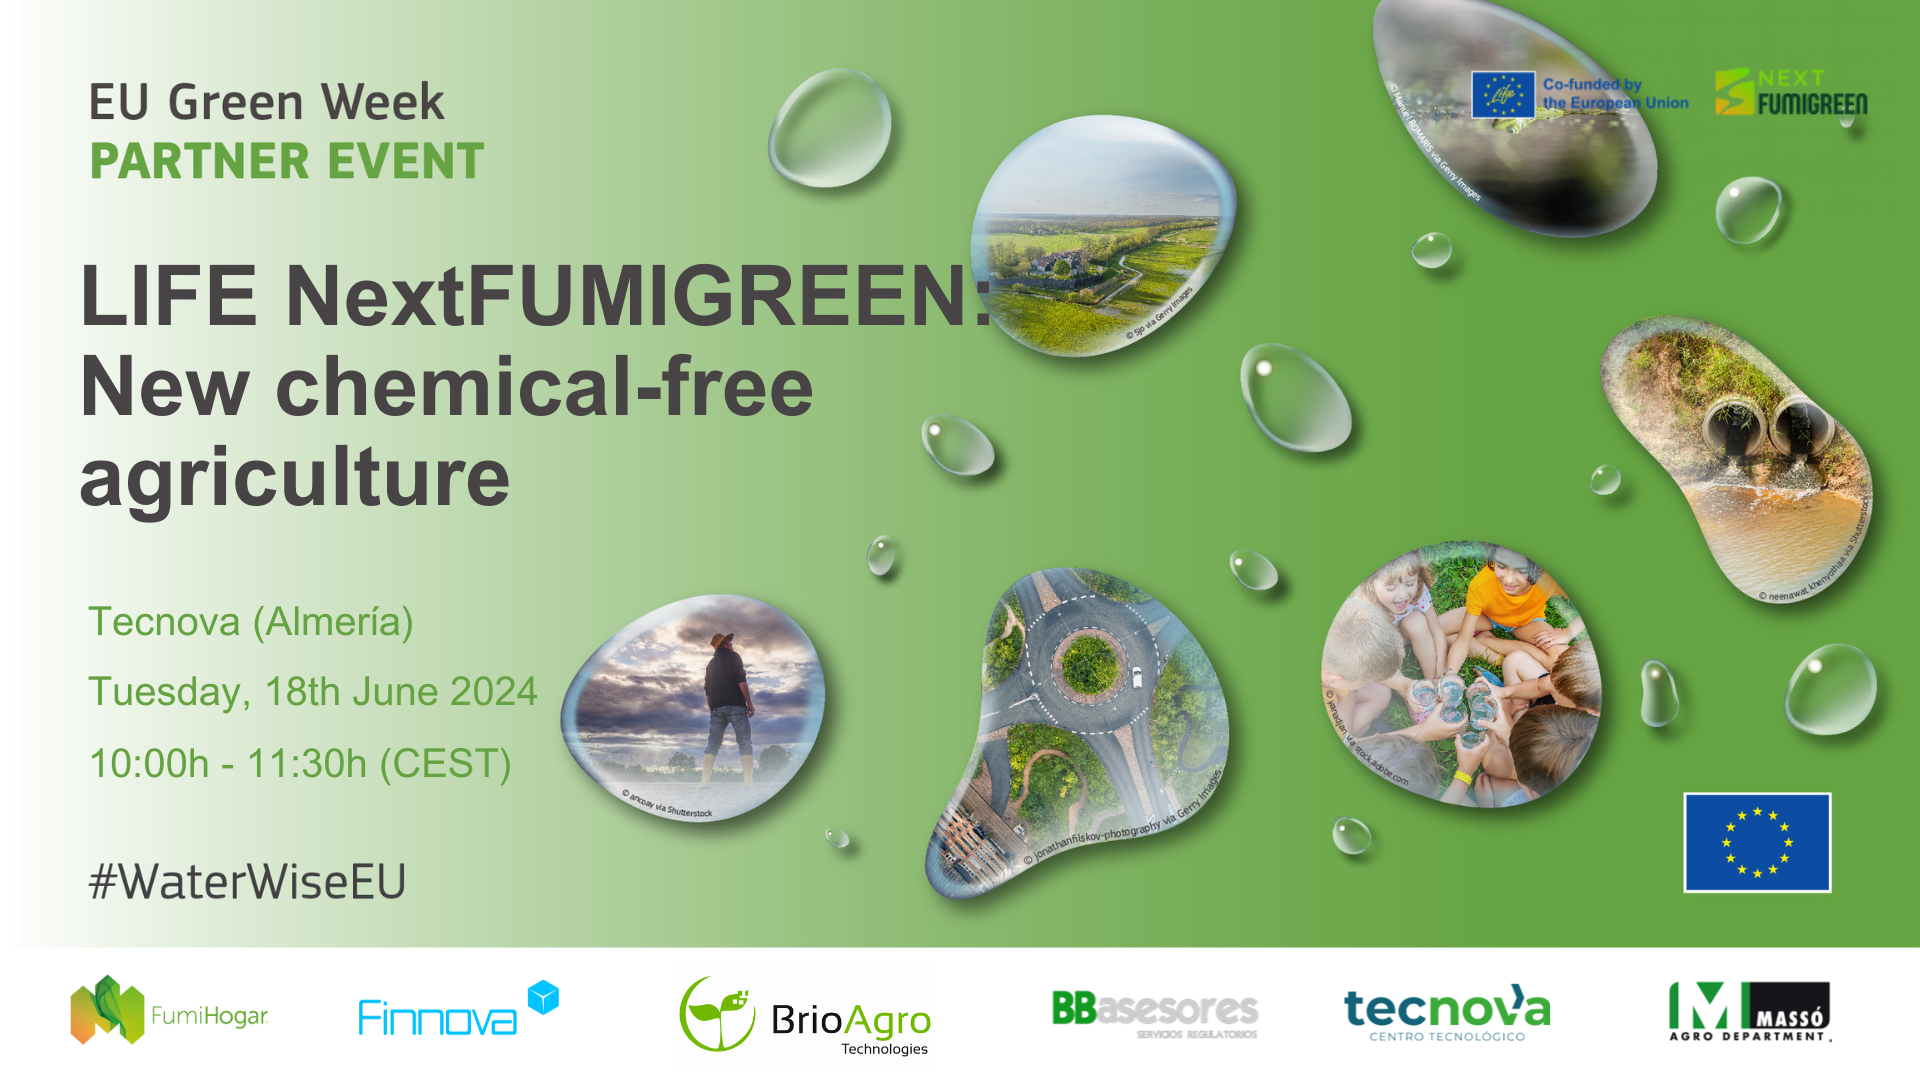 “New Cheminal-Free Agriculture.” LIFE NextFUMIGREEN organizes a hybrid event at the headquarters of Tecnova (Almería) on the occasion of the European Green Week